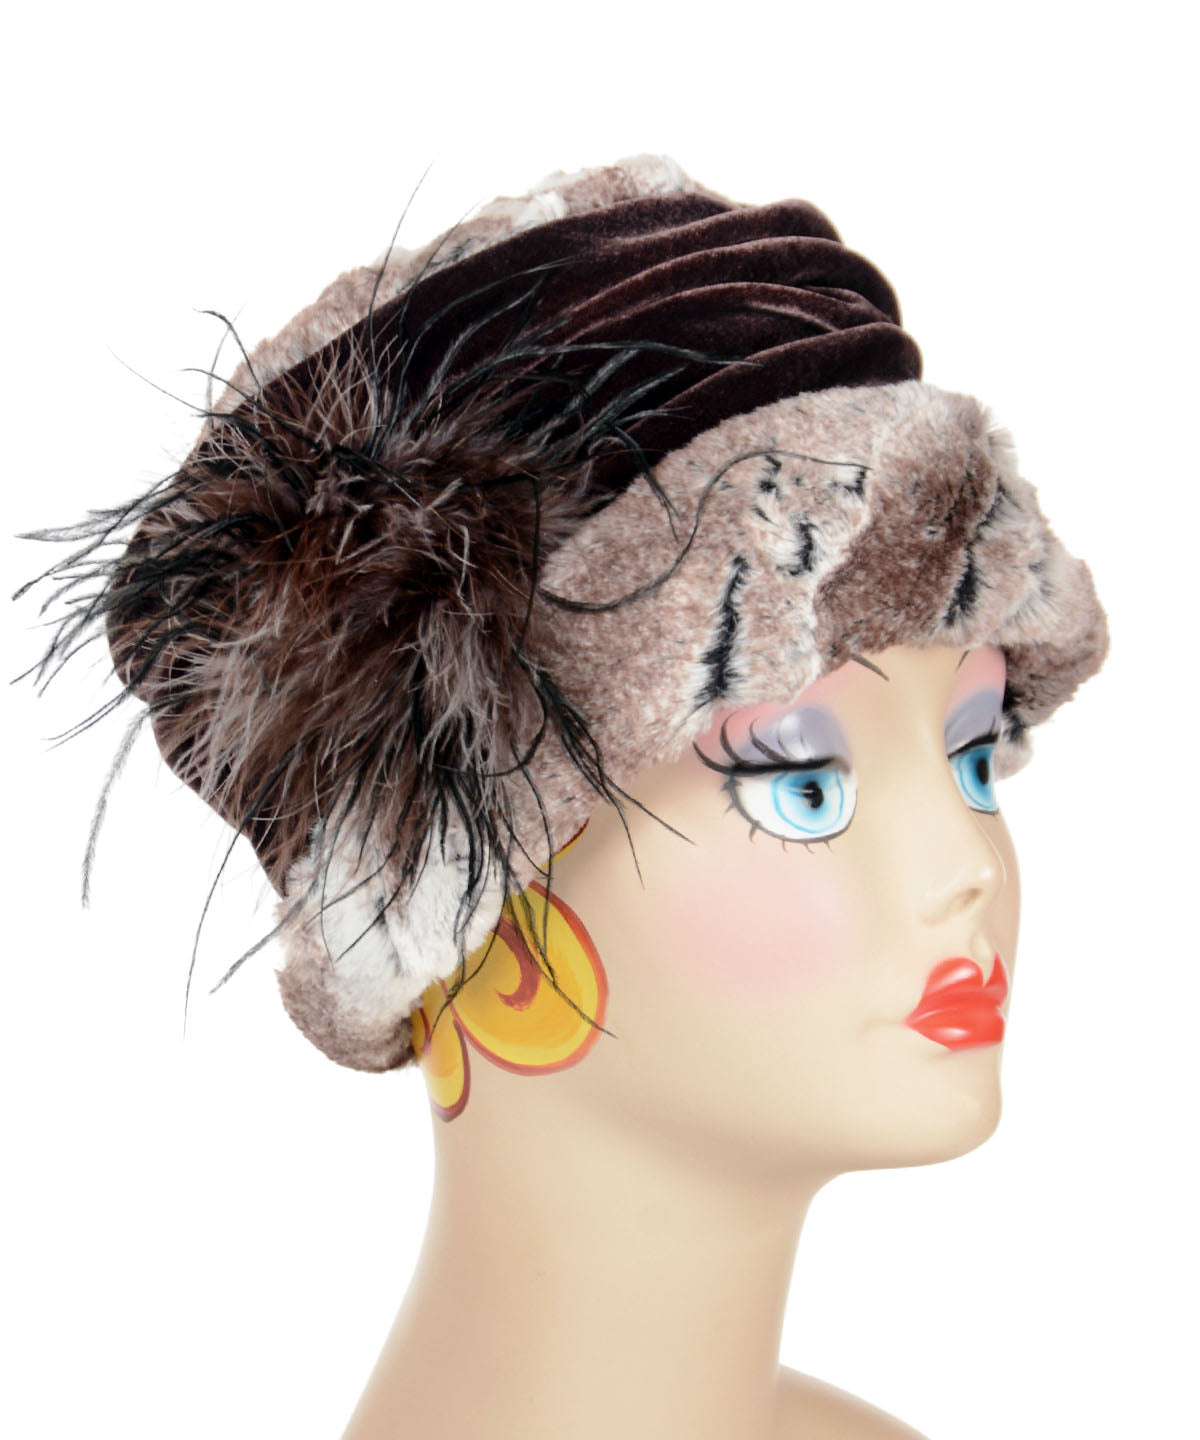  Ana Cloche Hat in Birch Brown Luxury Faux Fur with Chocolate Velvet Band with Ostrich Feather Brooch| Handmade in Seattle WA| Pandemonium Millinery